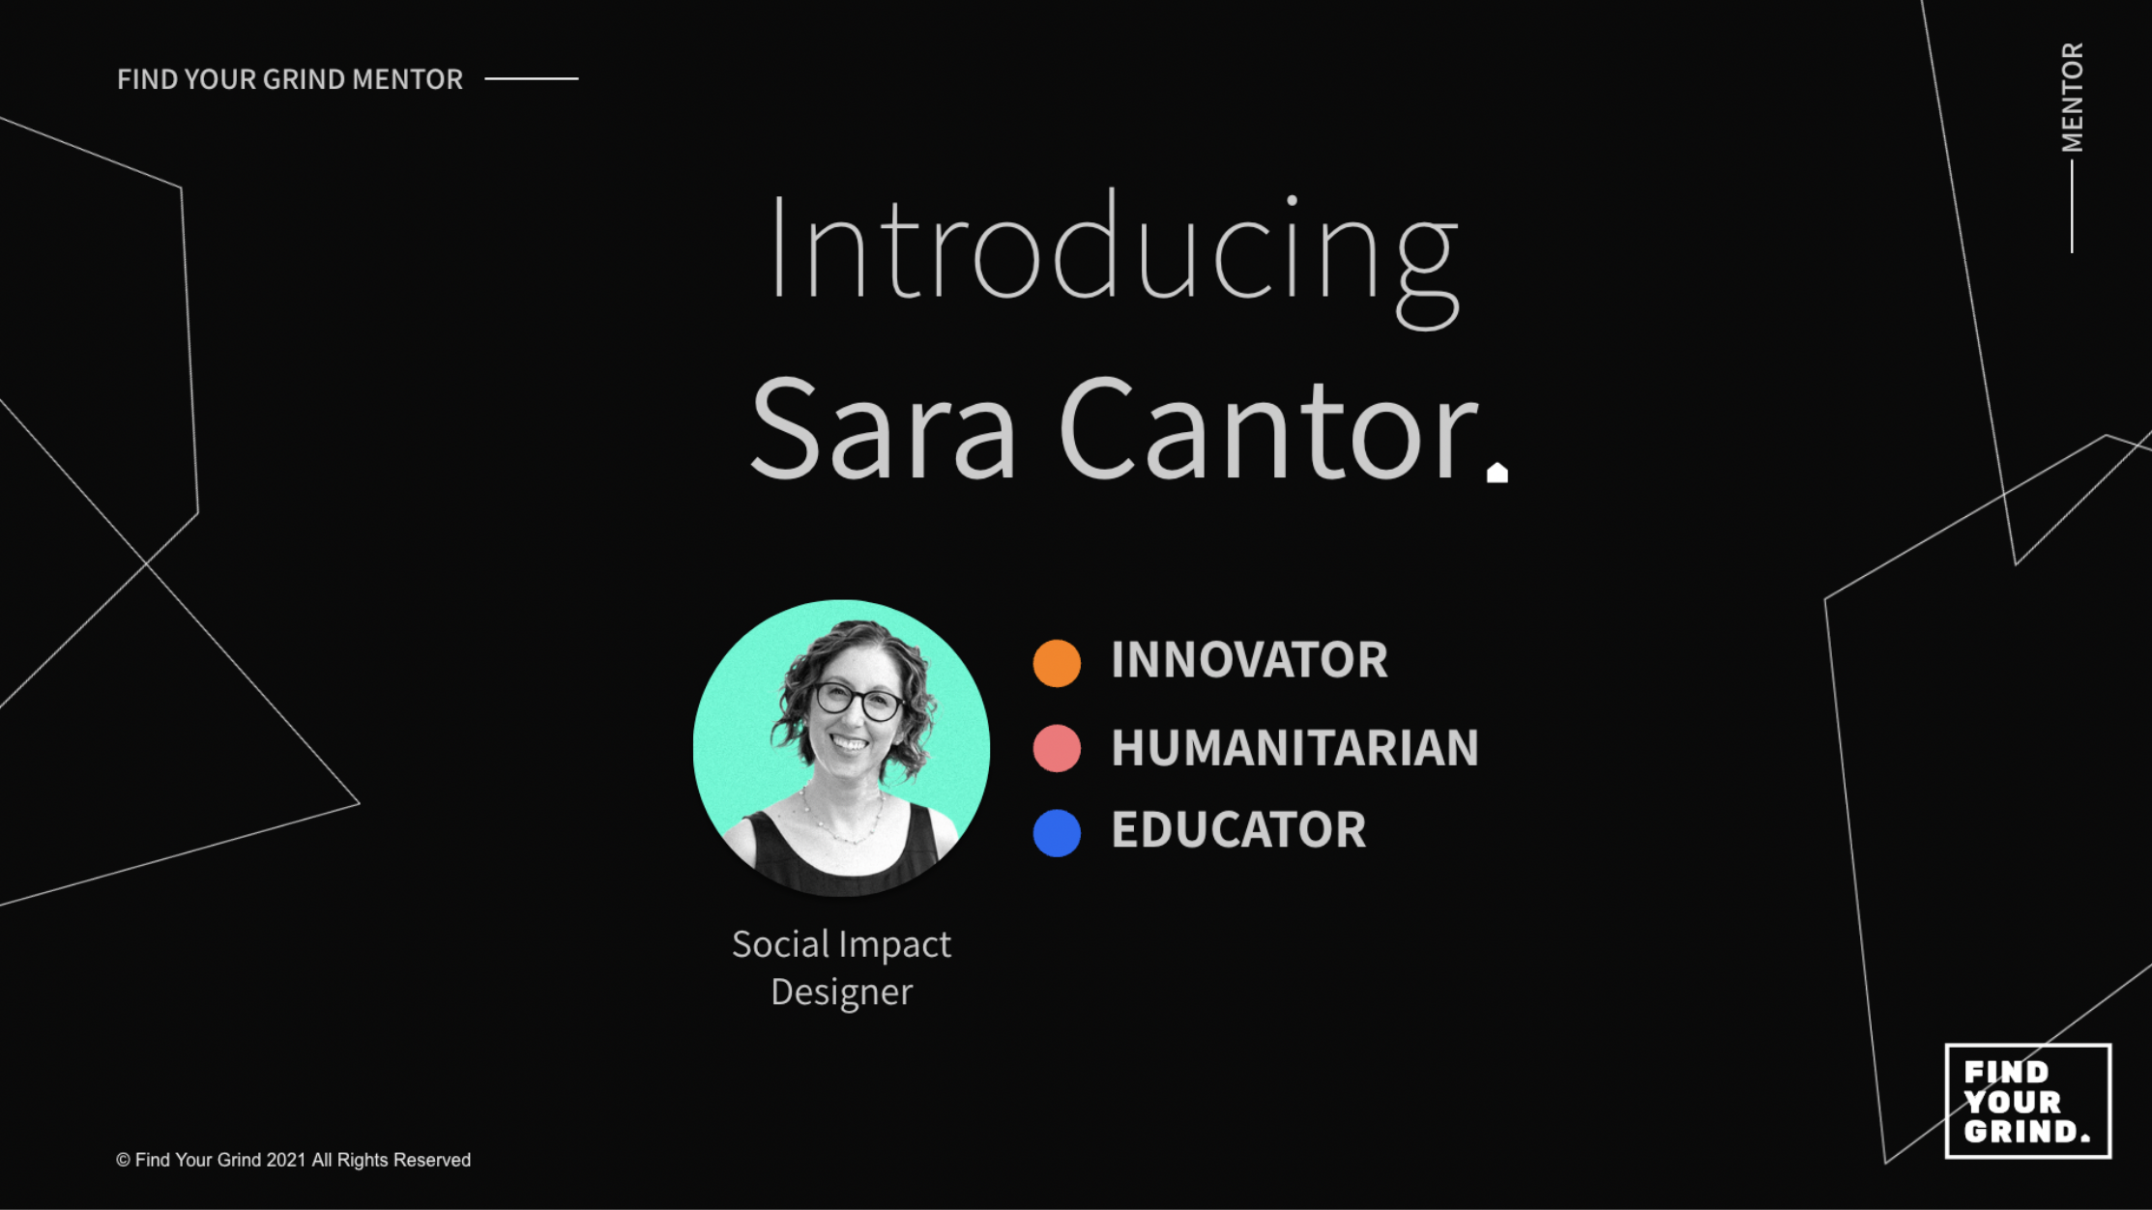 mostly black screen with the words "Introducing Sara Cantor" and a small headshot of a woman on a teal background